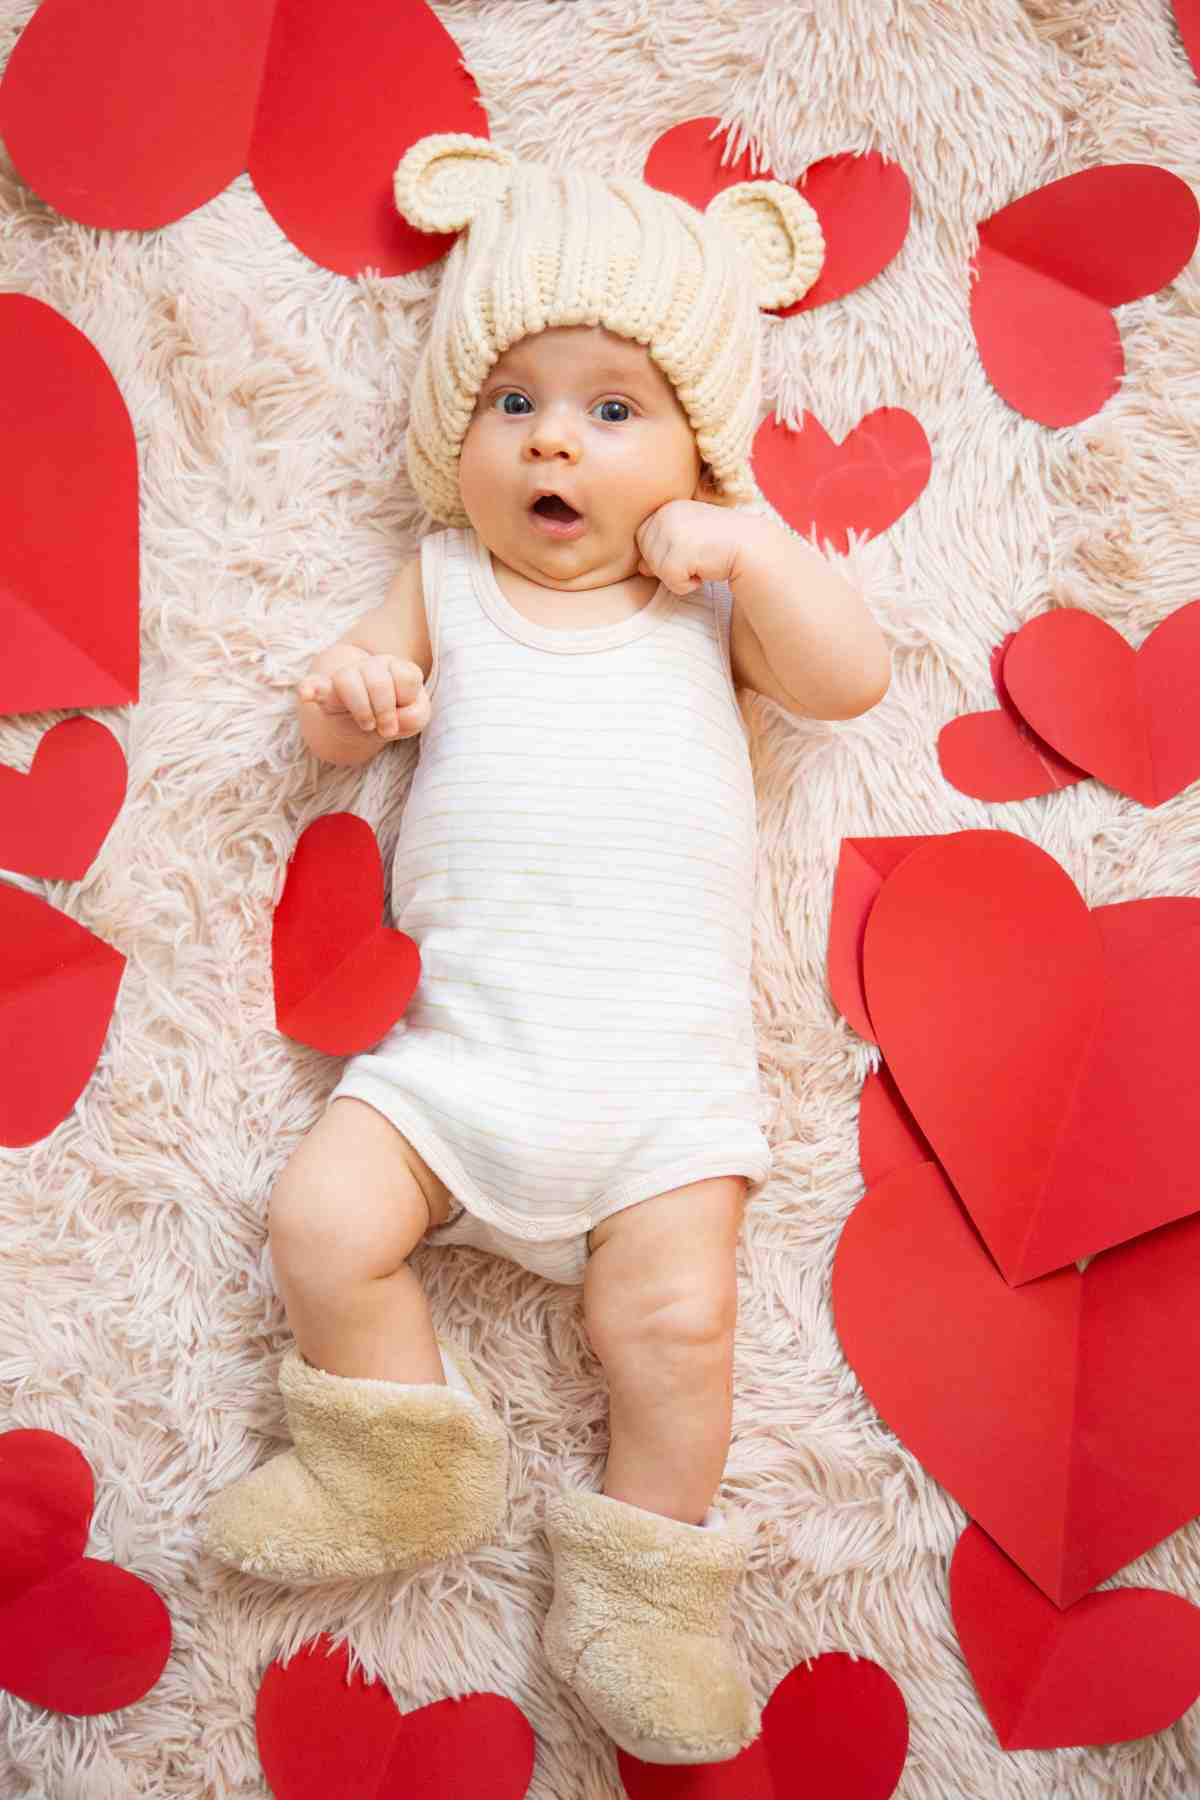 A baby wearing a teddy bear hat laying on red hearts.